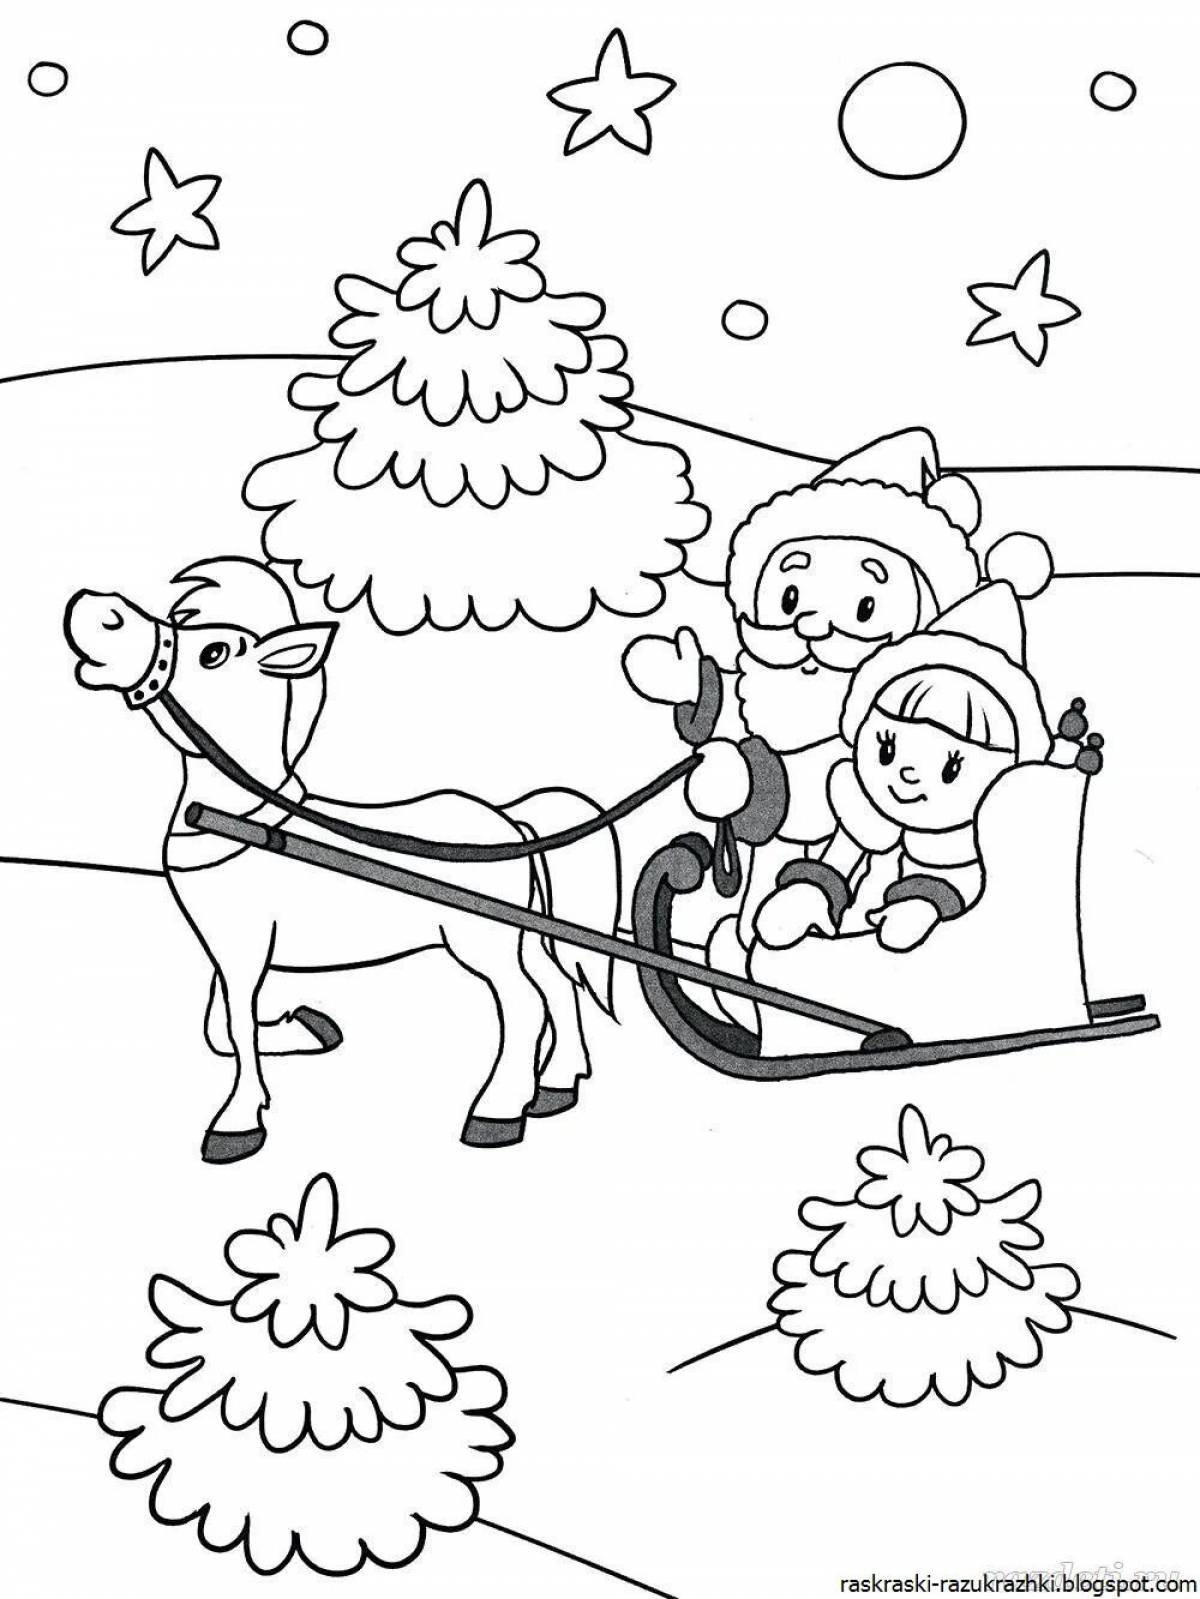 Coloring book winter snowball fight